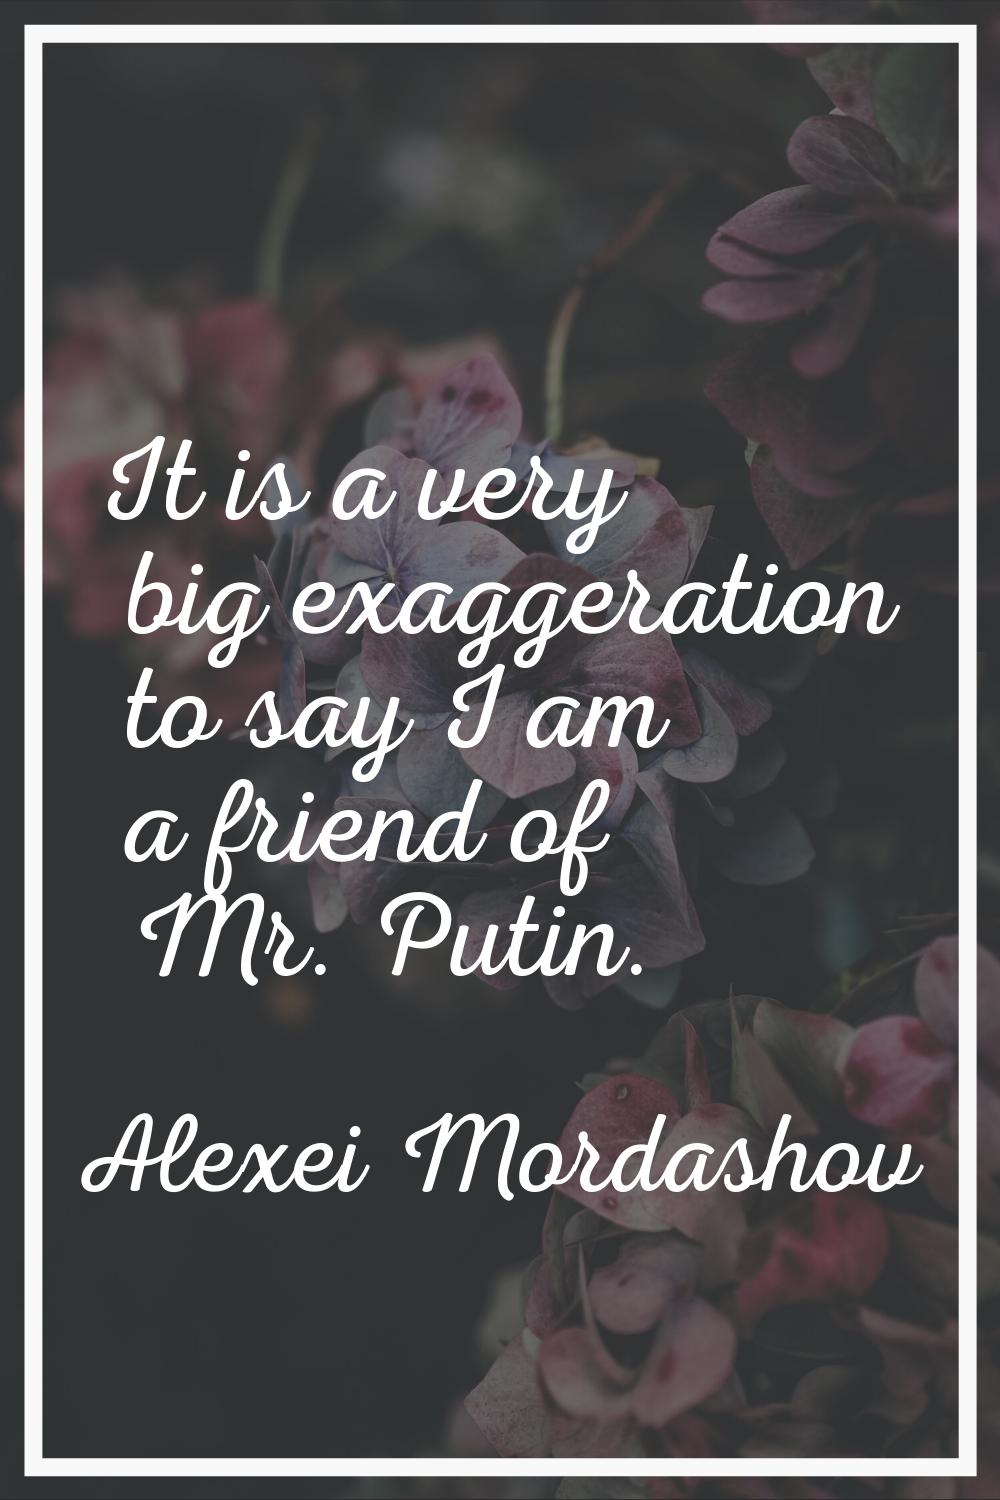 It is a very big exaggeration to say I am a friend of Mr. Putin.